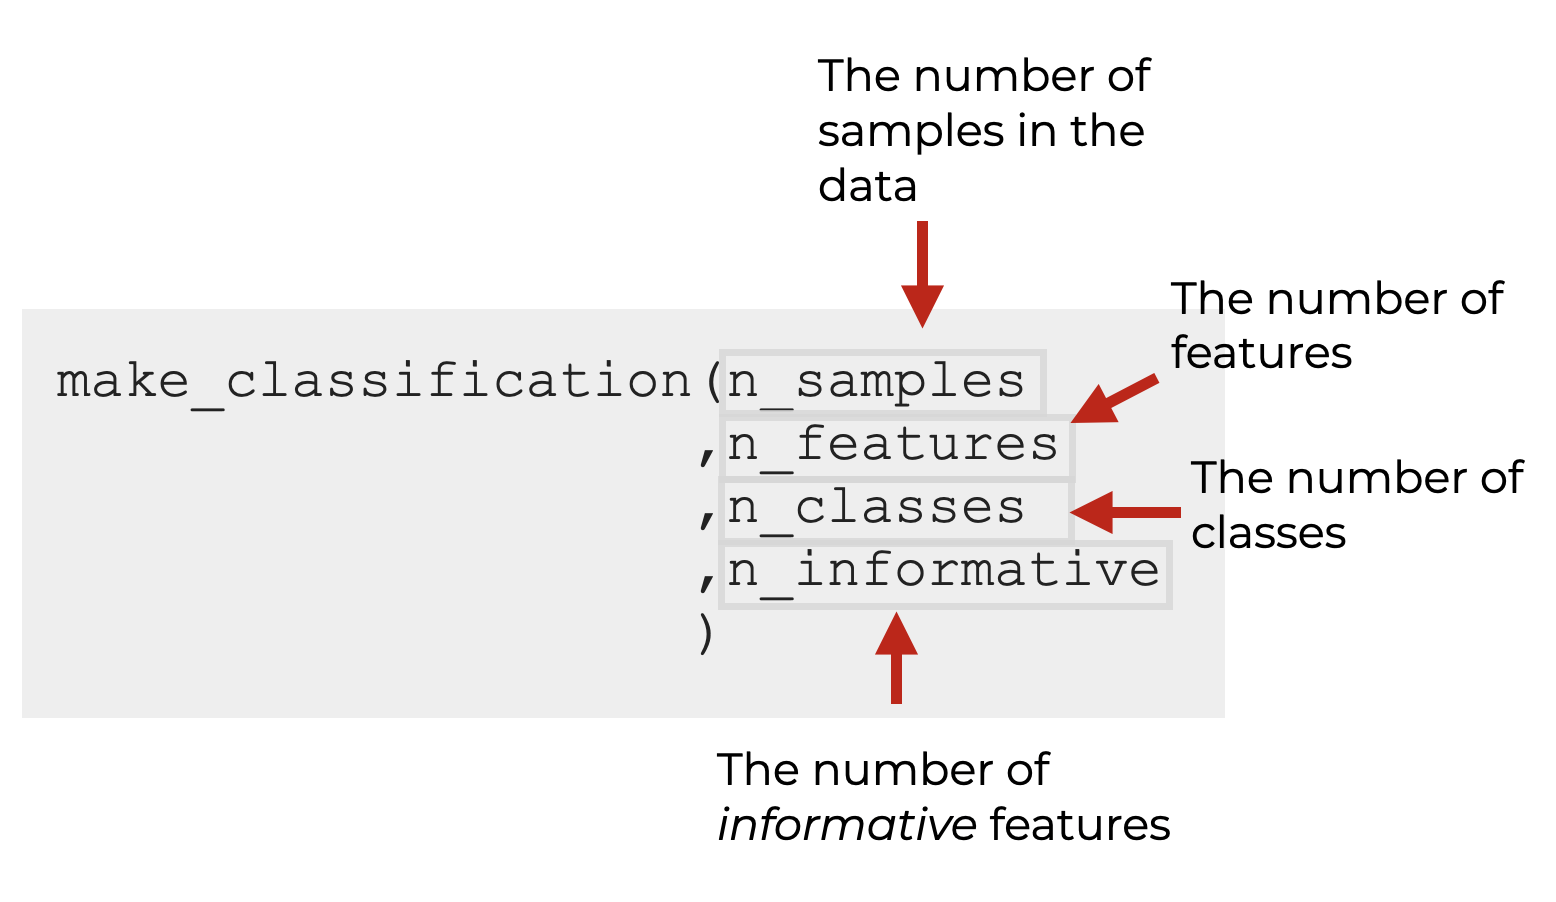 An image that shows the syntax for the most important parameters of the Scikit Learn make classification function, including n_samples, n_features, n_classes and n_informative.